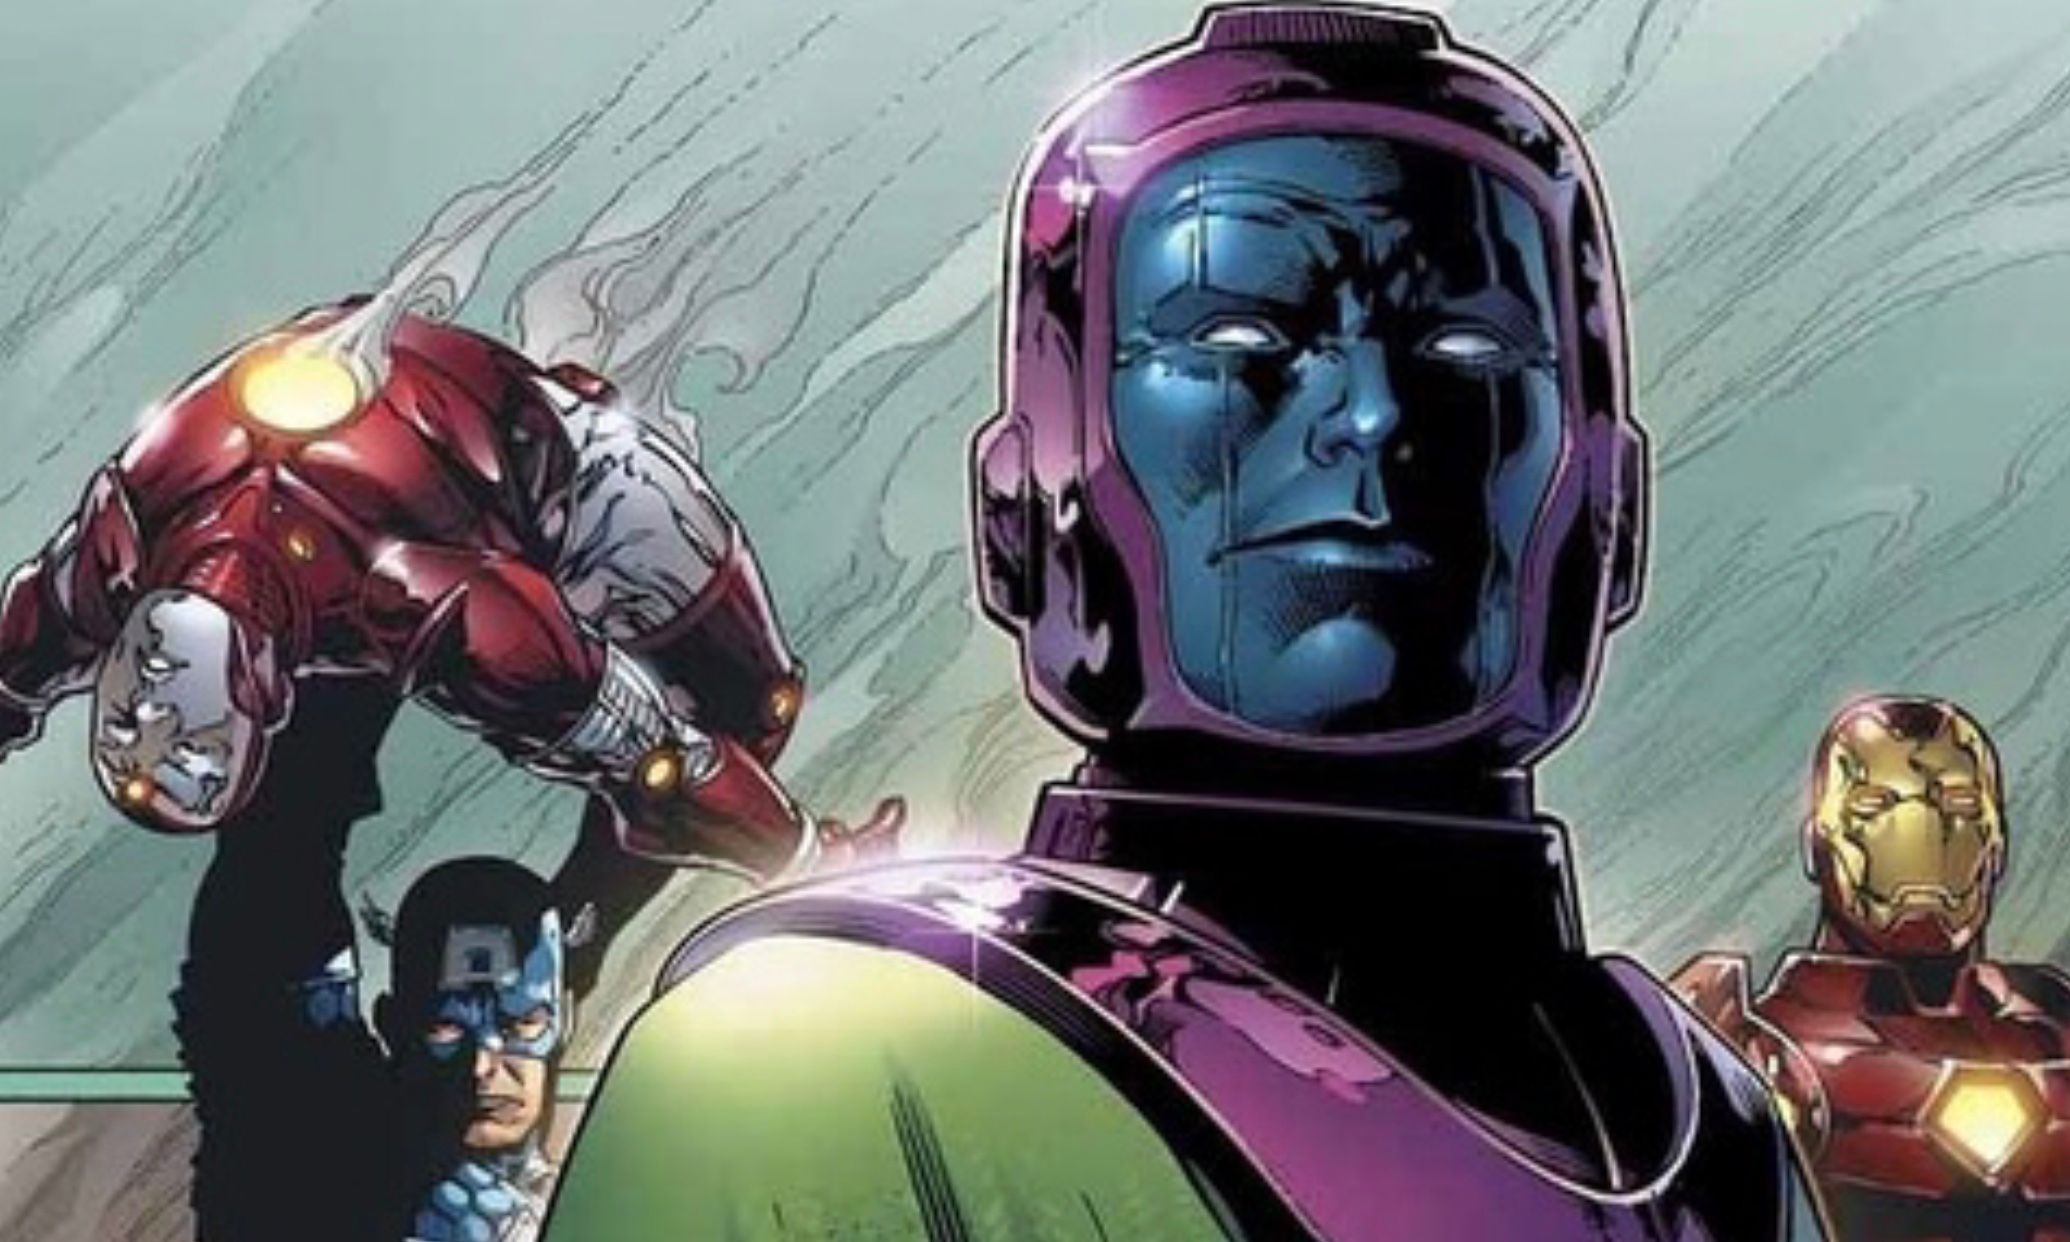 Kang in his signature suit of armor.